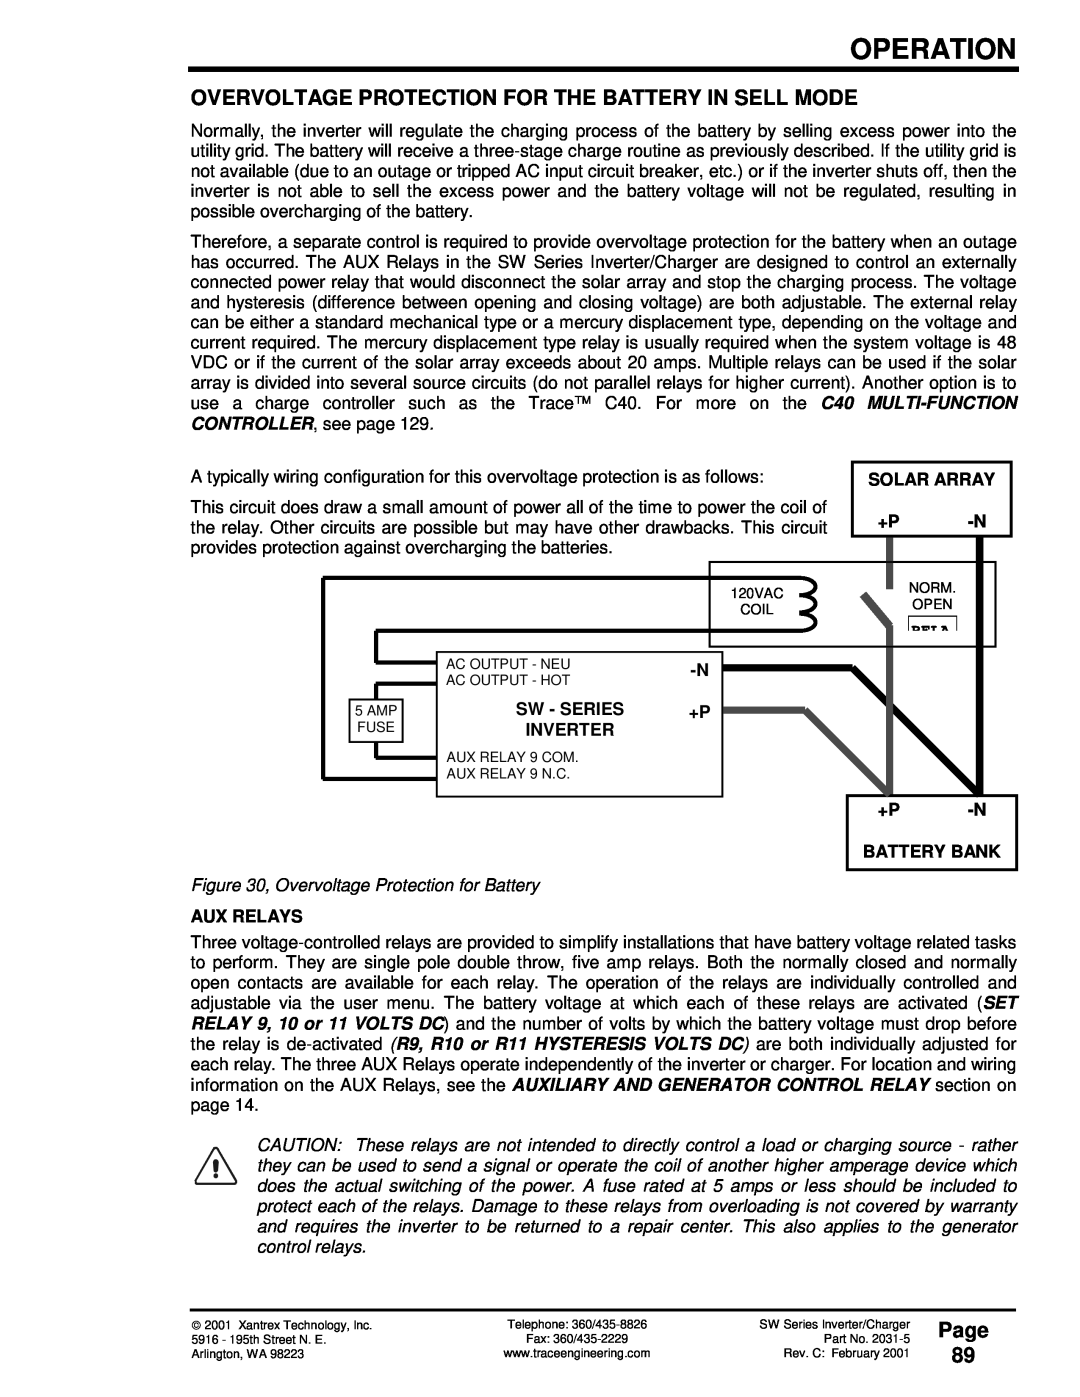 Xantrex Technology SW Series owner manual Page 89, Solar Array, Sw - Series, Battery Bank, Aux Relays, Operation, Inverter 